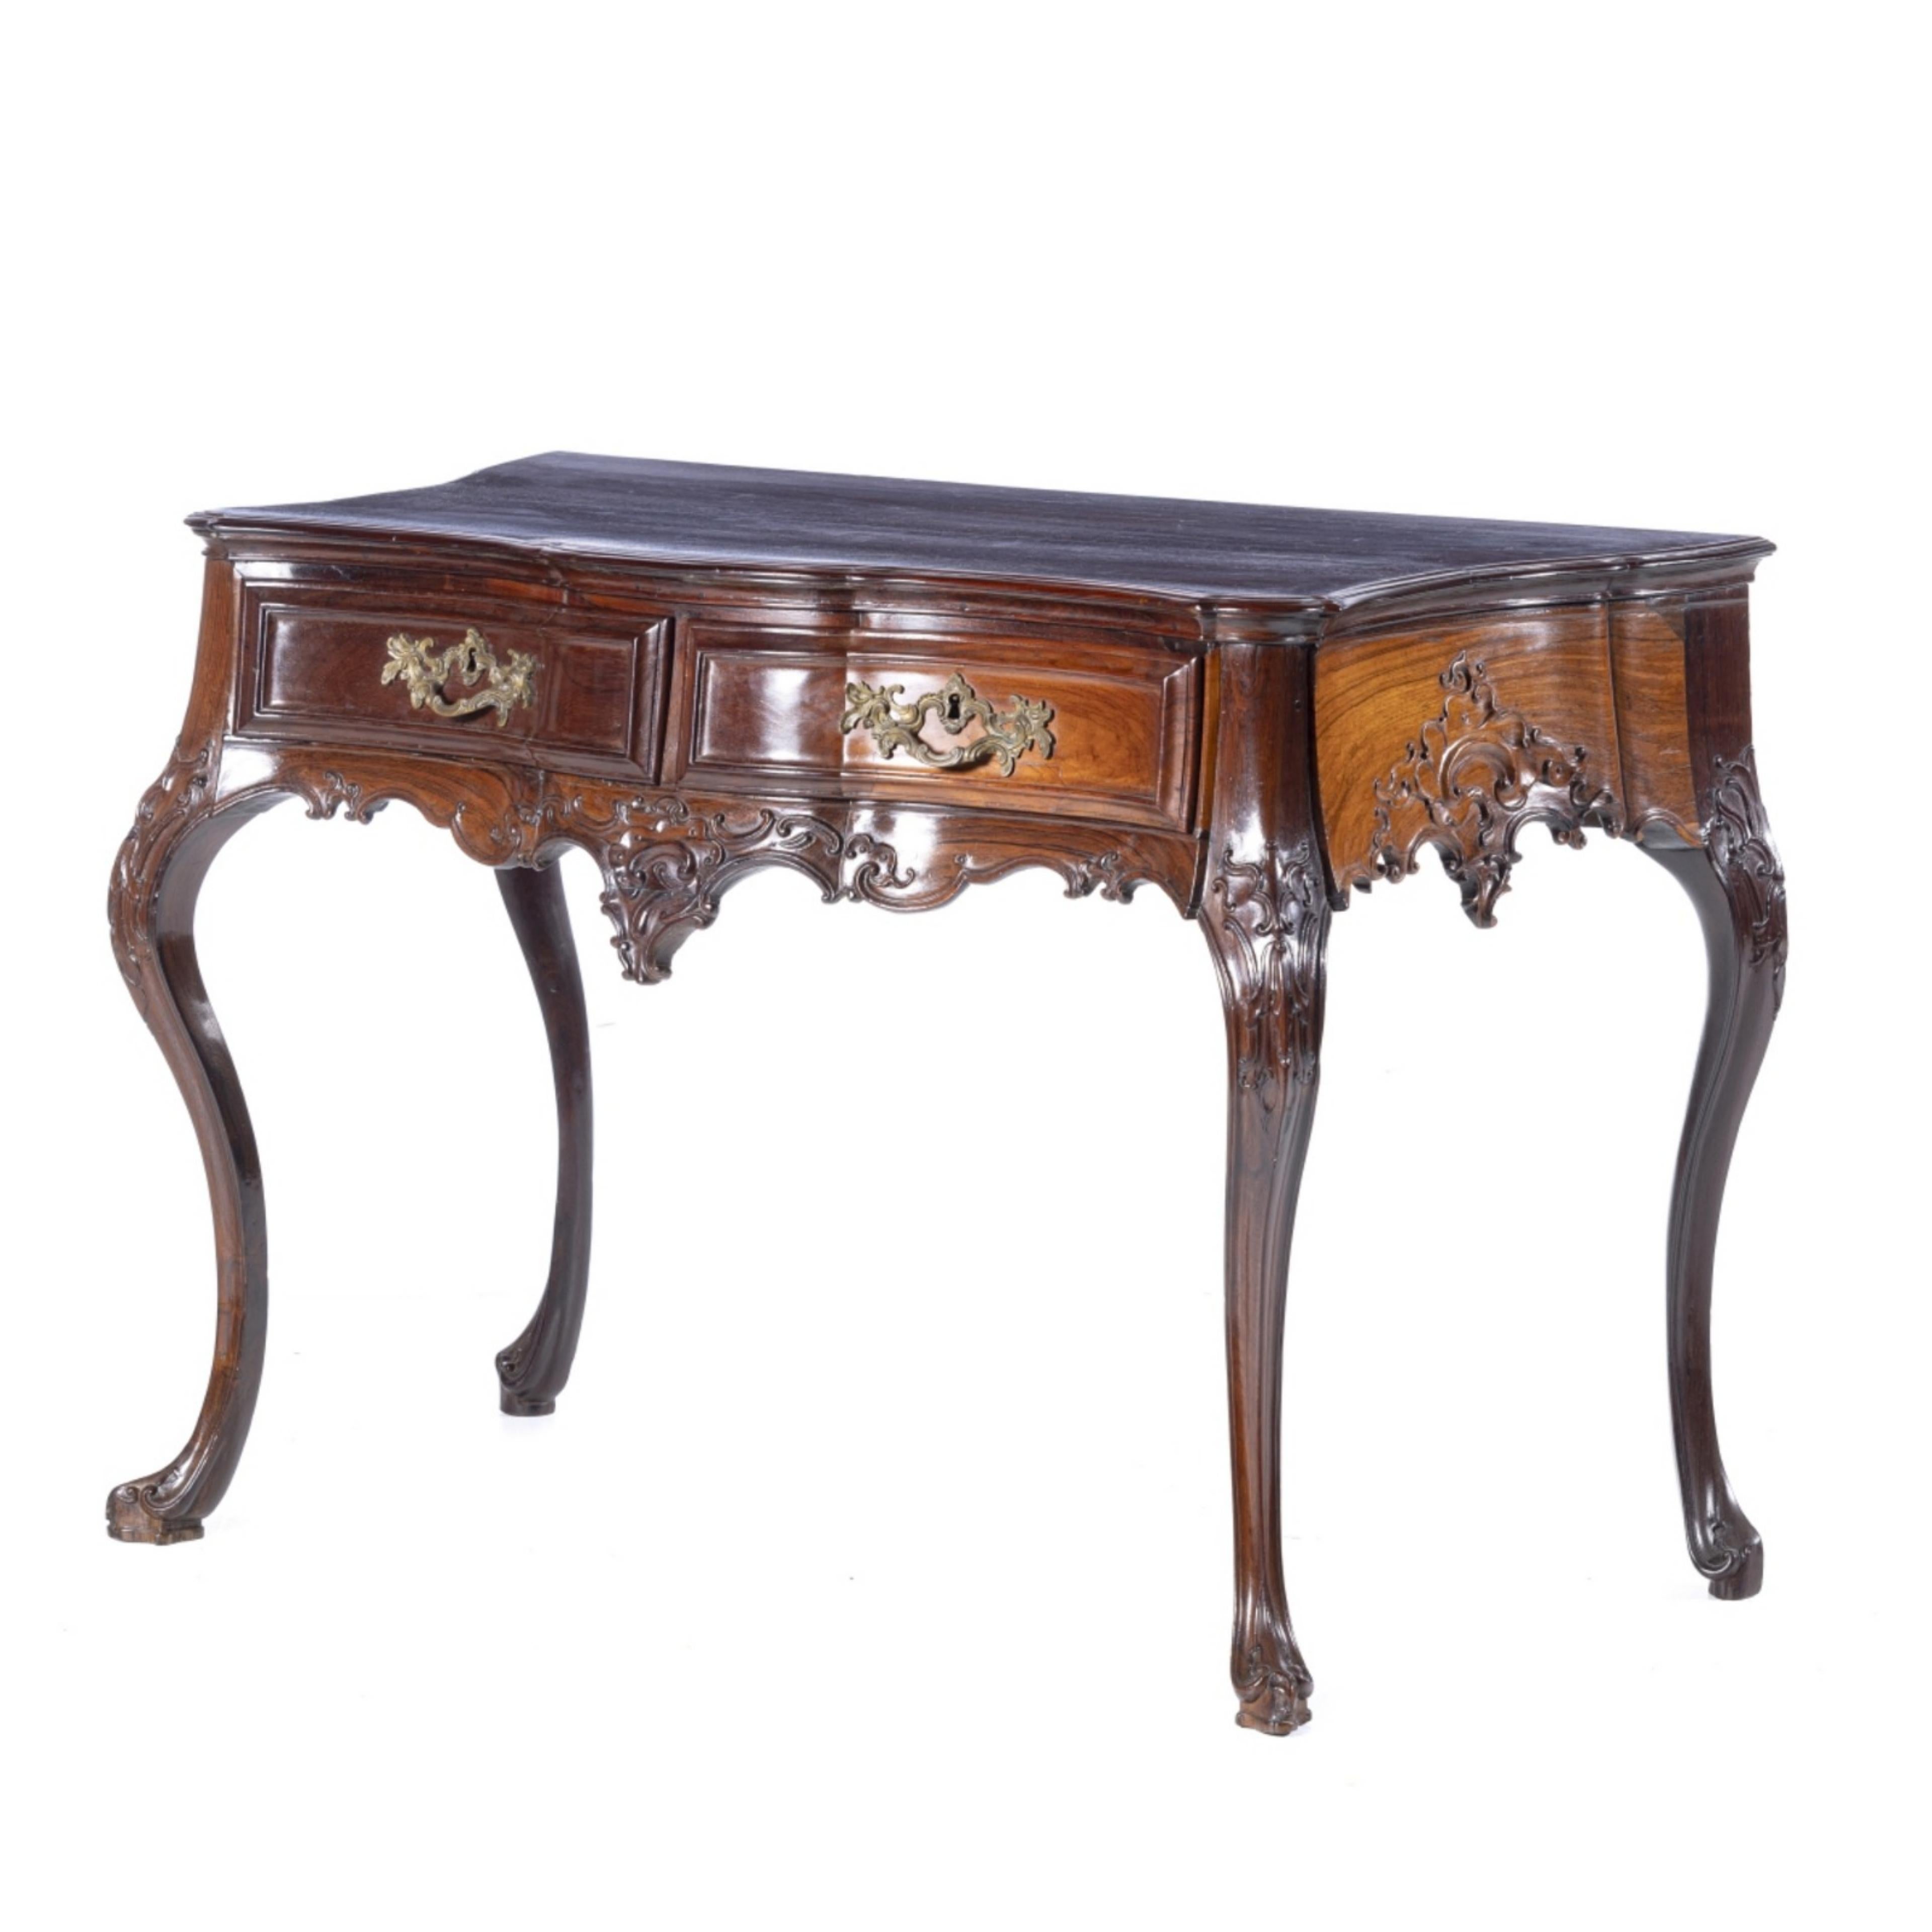 Hand-Crafted Important Portuguese Backing Table D. José 18th Century Rosewood For Sale